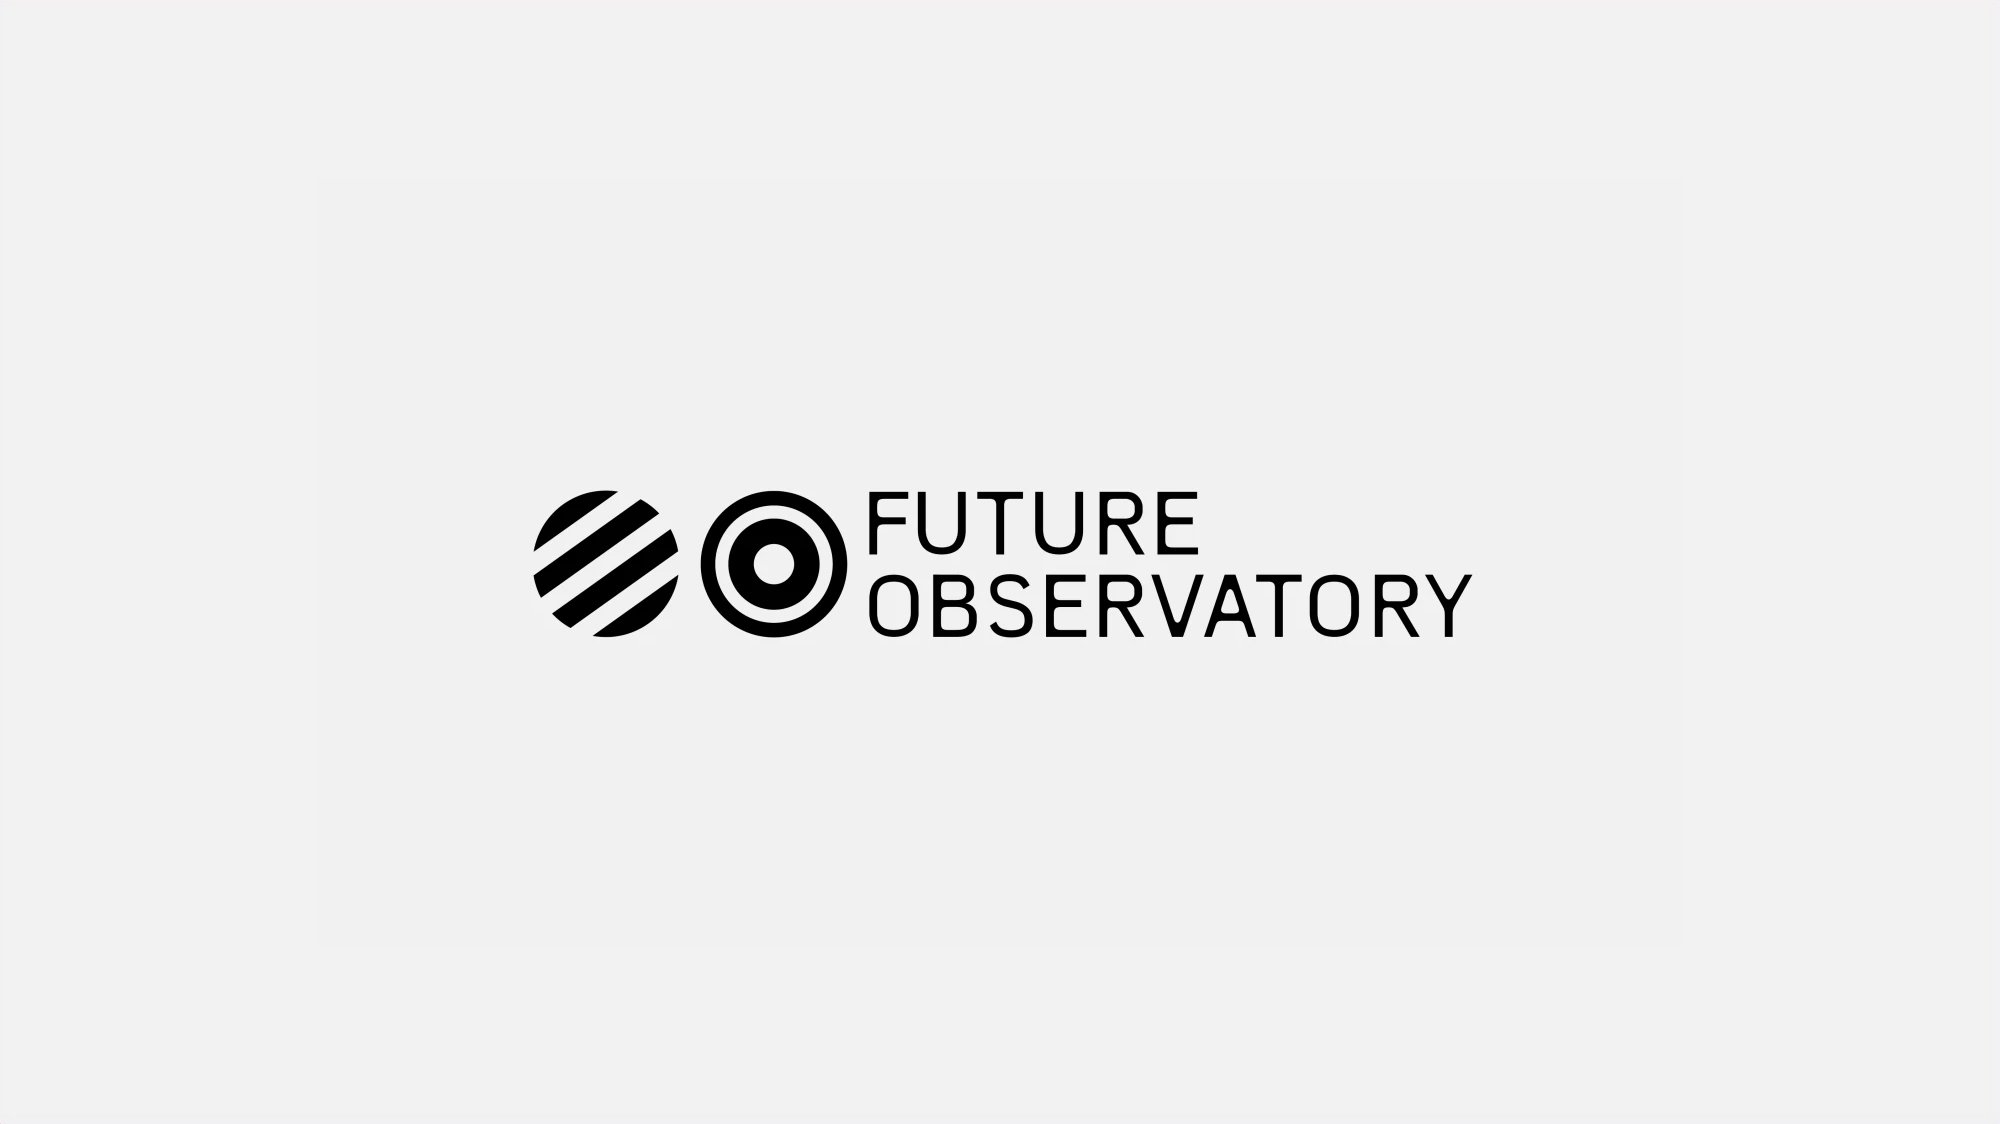 Brand identity by London-based SPIN for London-based design research organisation Future Observatory